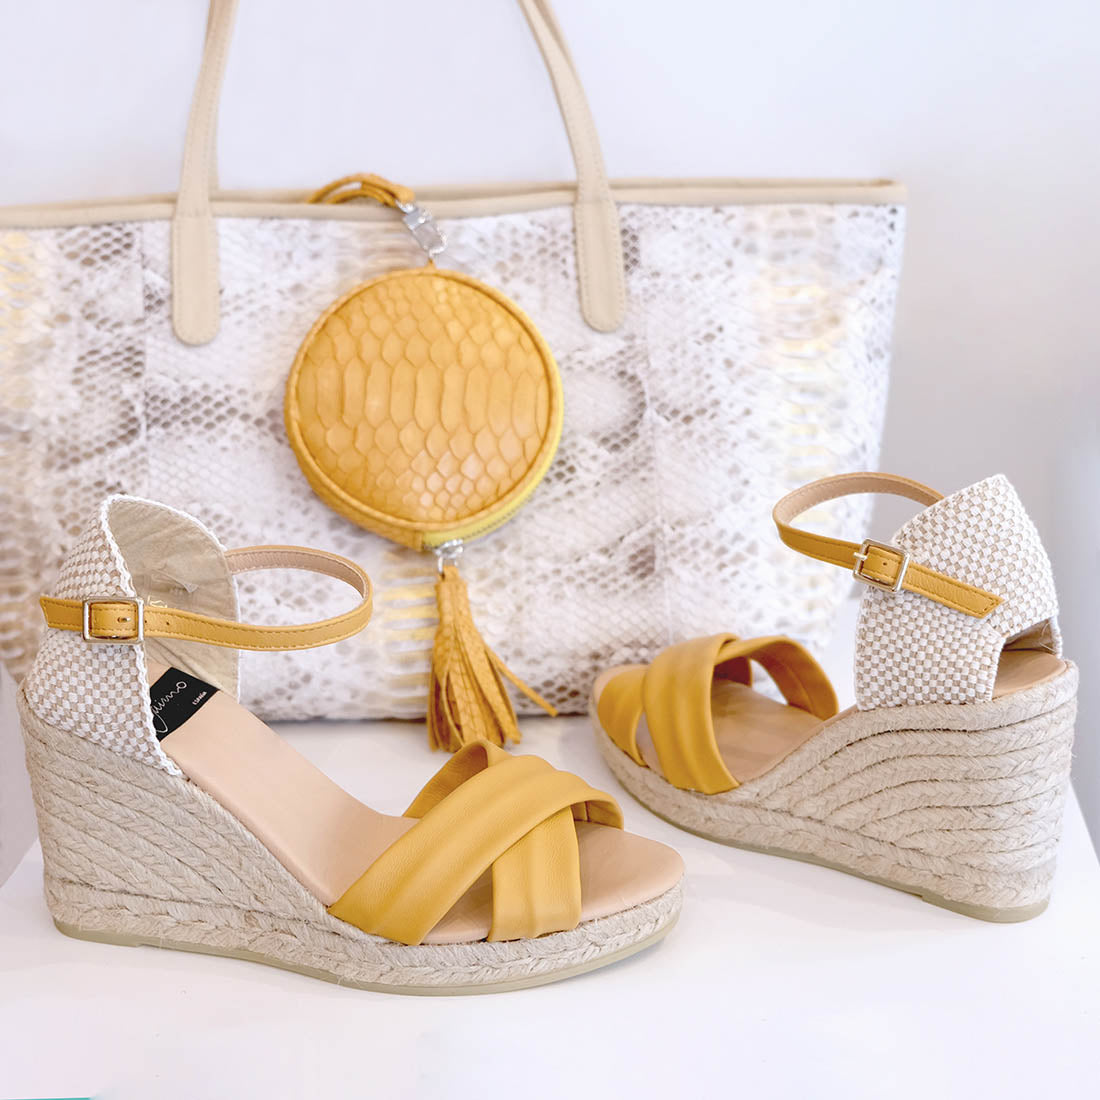 beautiful espadrille wedges in mustard yellow nappa leather and ankle slings in the same leather and handbags in natural and yellow leather from suzette accessories